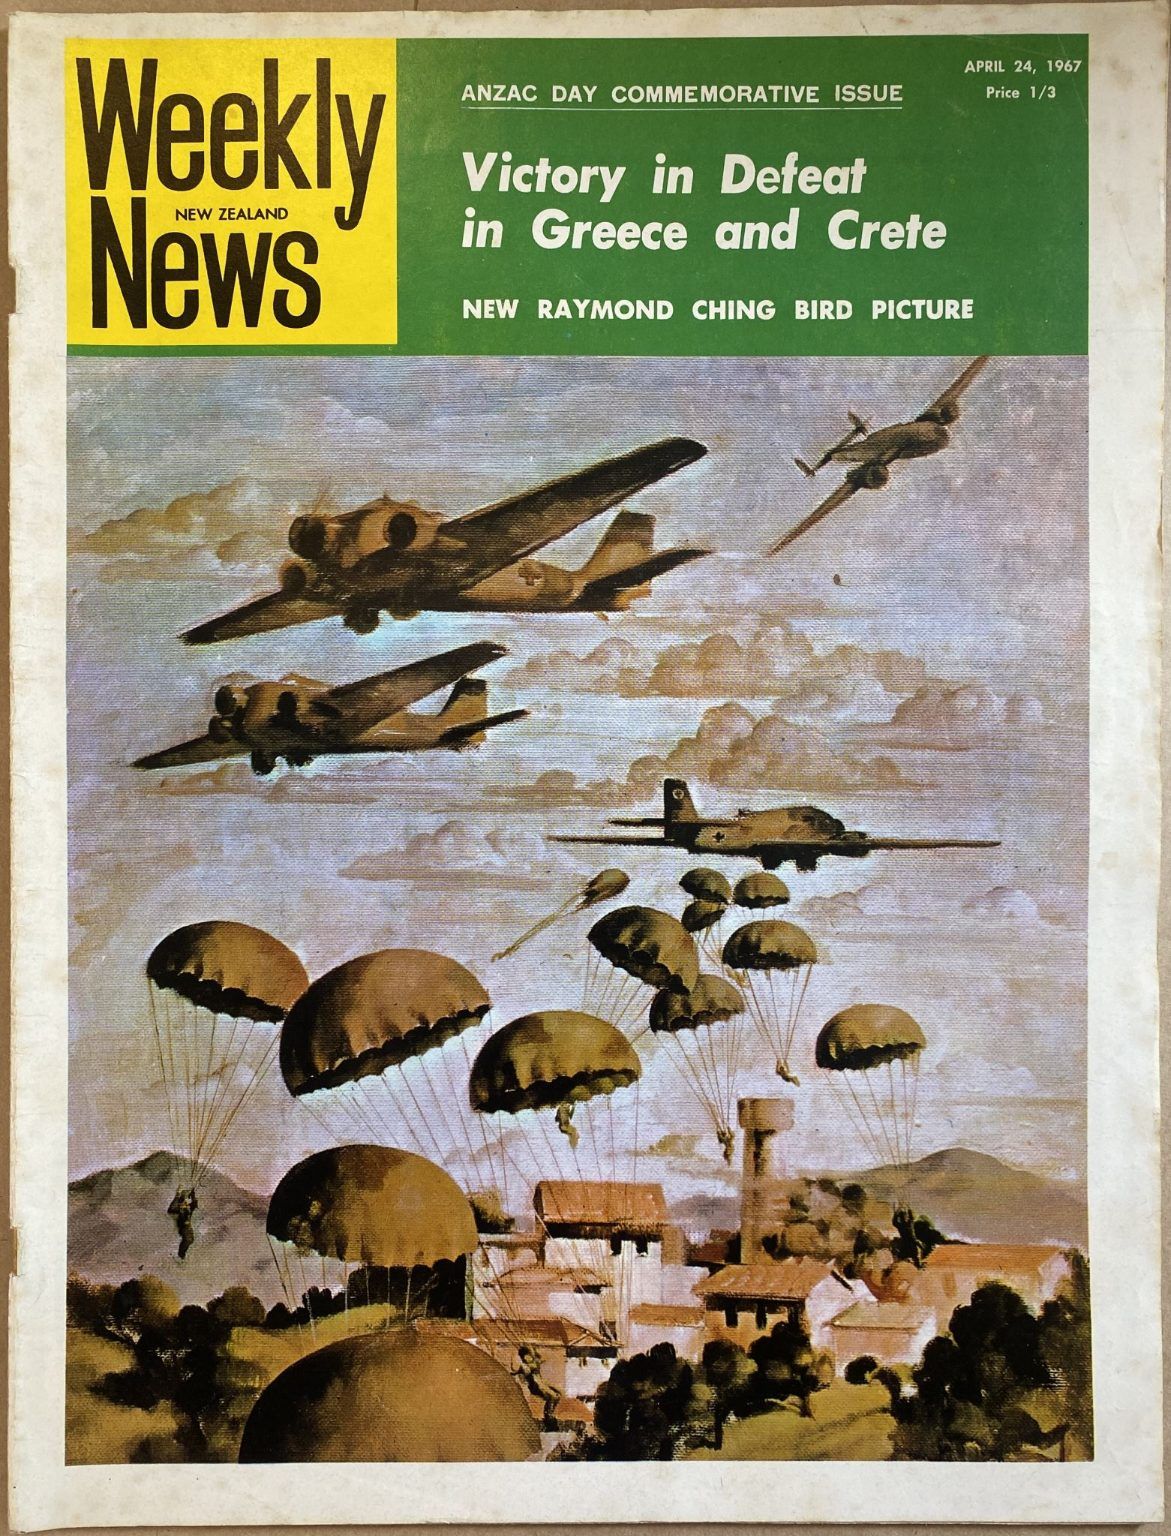 OLD NEWSPAPER: New Zealand Weekly News, No. 5395, 24 April 1967